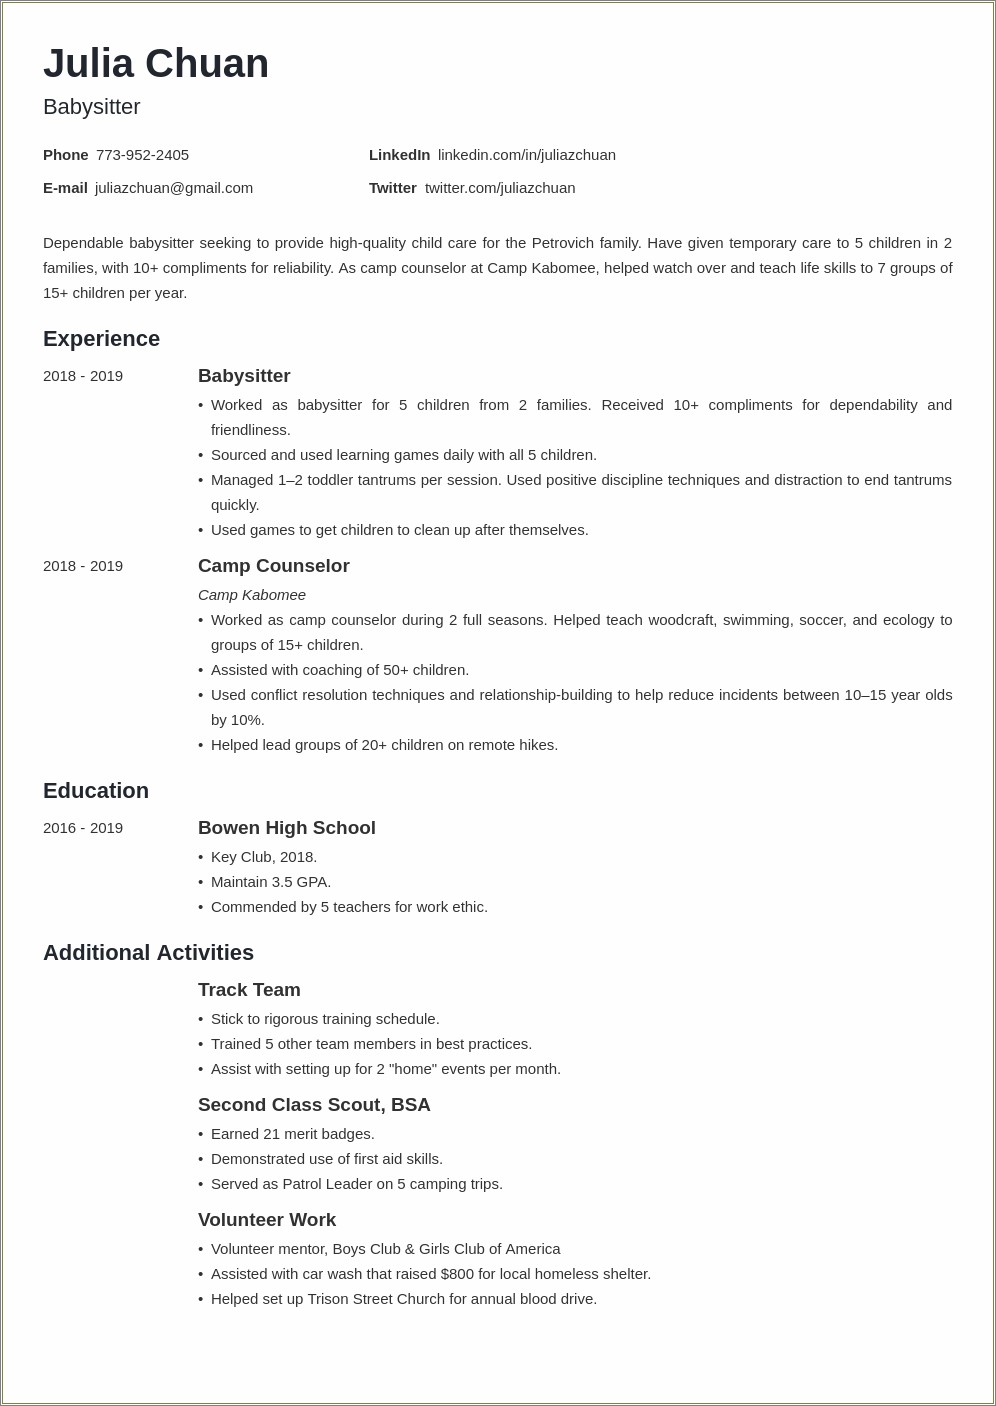 Where To Put Community Services In Resume